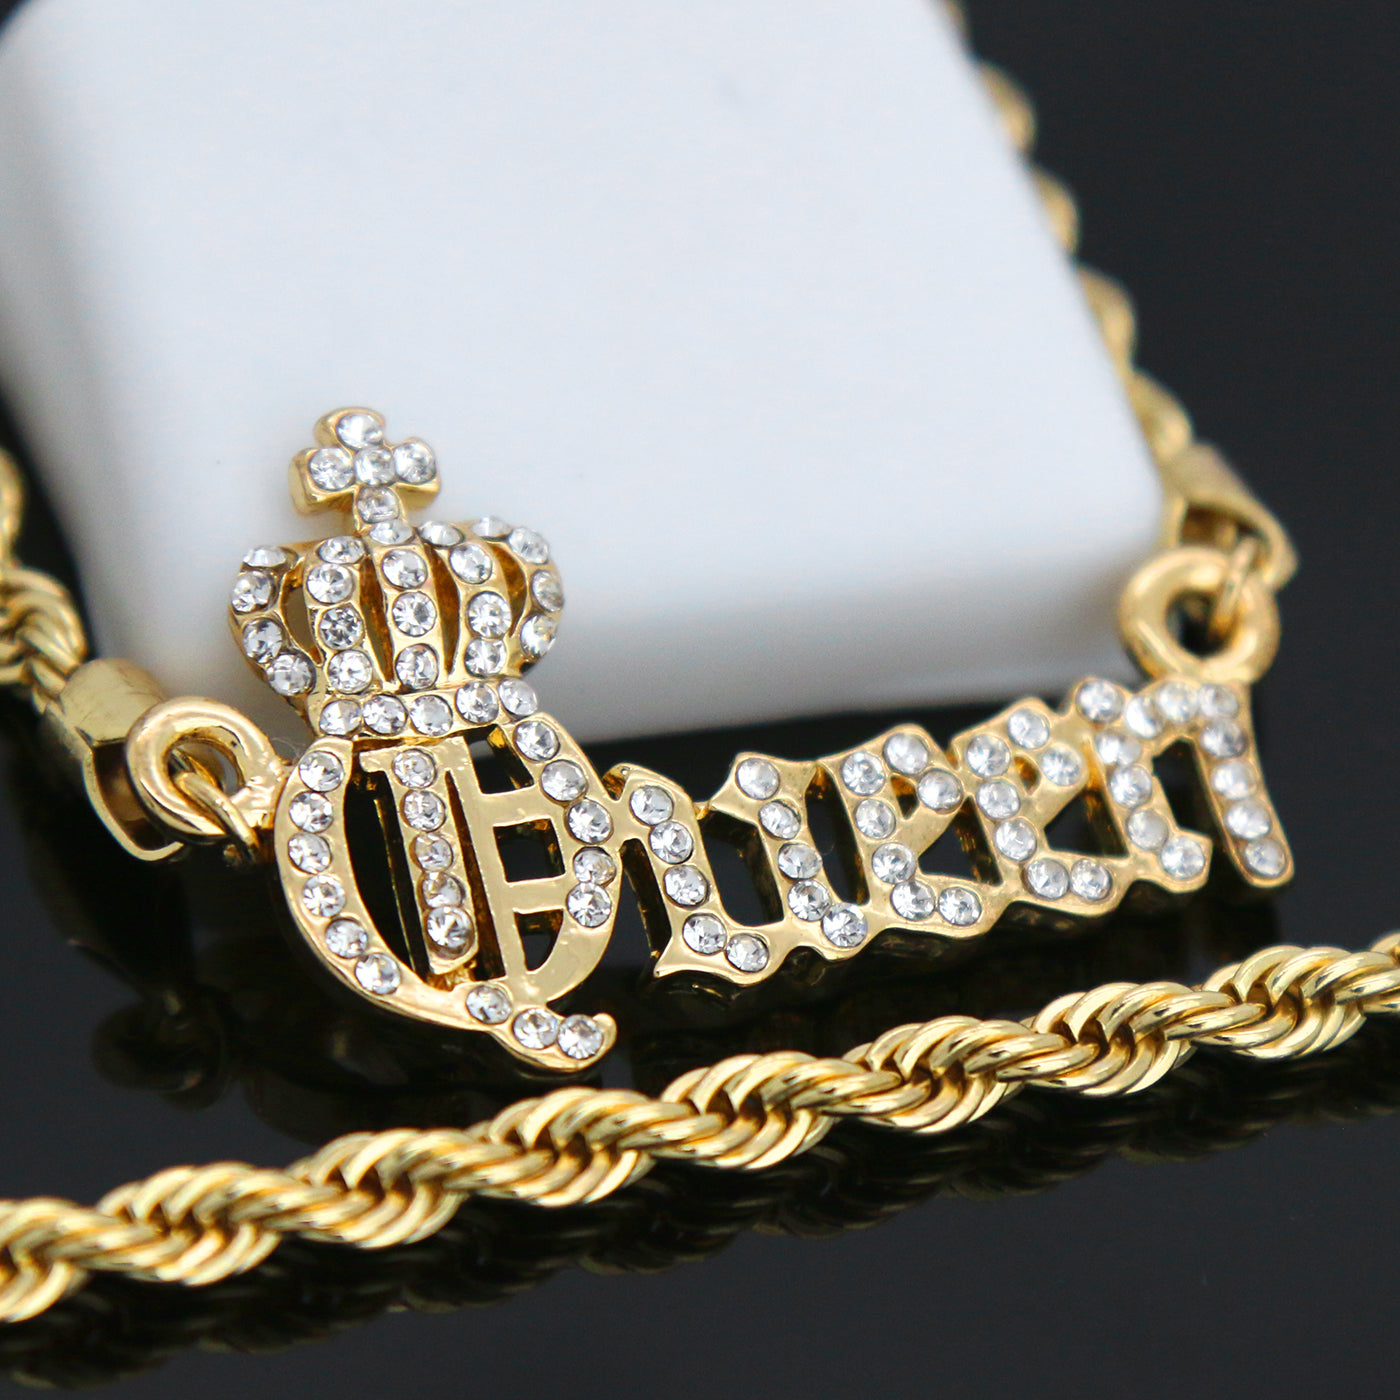 QUEEN Pendant with Gold Rope Chain